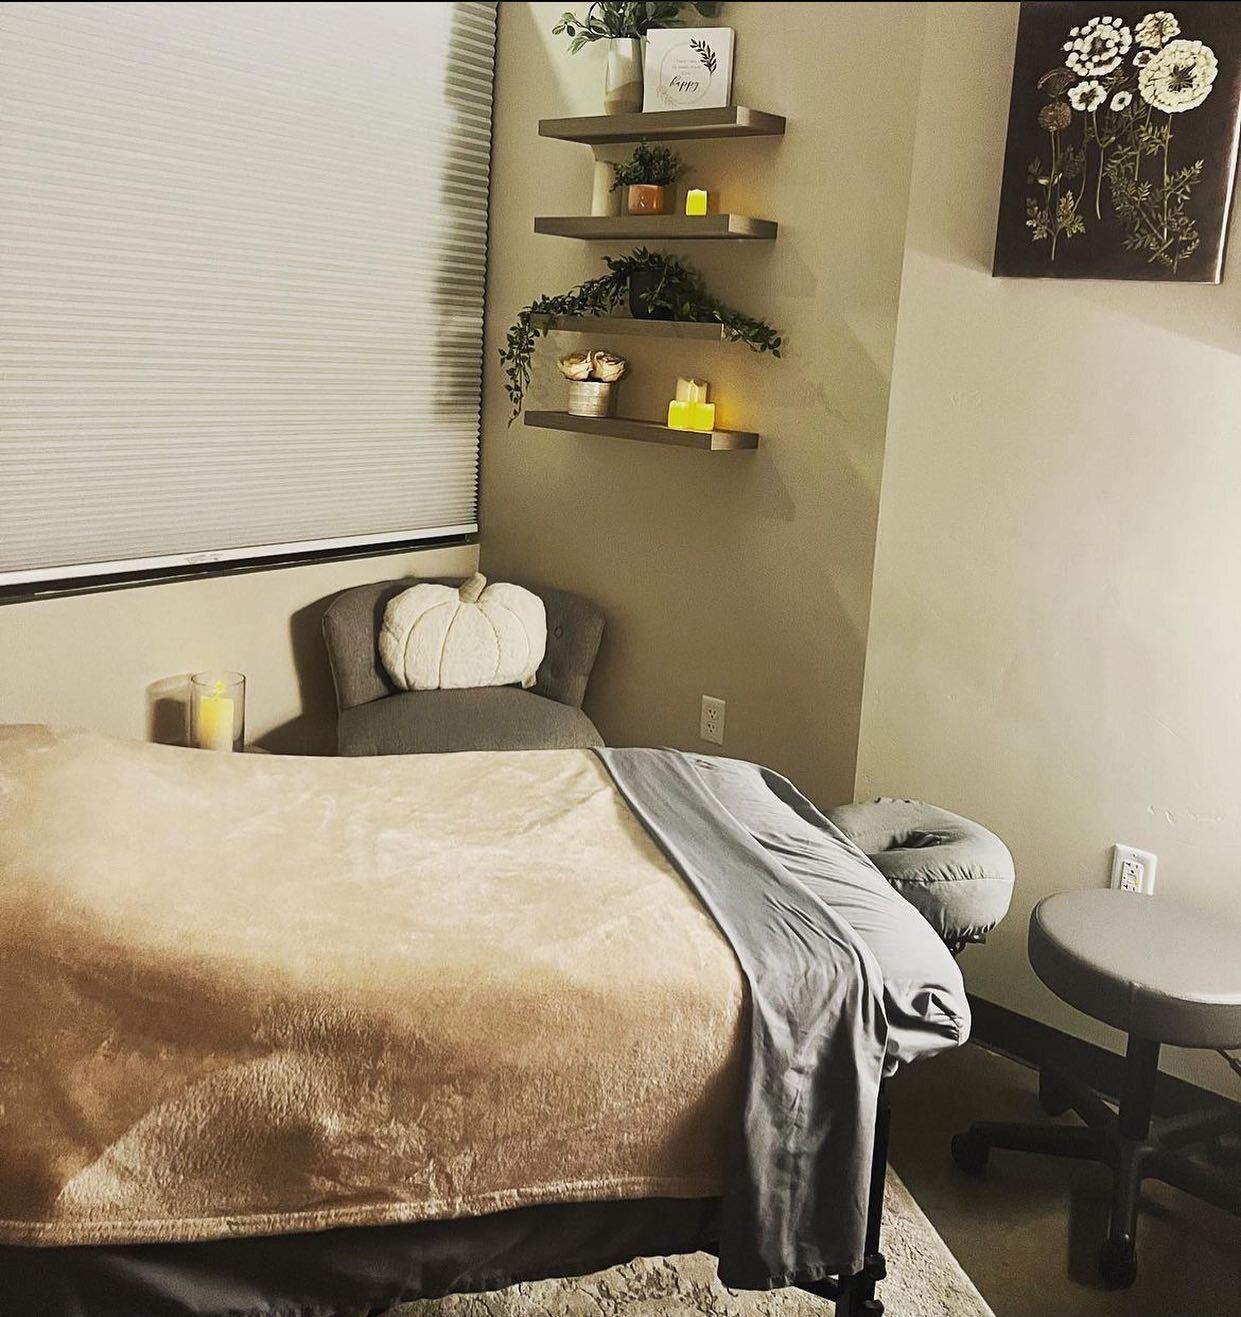 Something magical about a warm massage room when it&rsquo;s cold outside! @annasmithlmt not only is loving the early sunsets, she loves helping others feel amazing. What&rsquo;s your favorite type of massage? Hot stone, deep tissue, or Swedish?

#sel